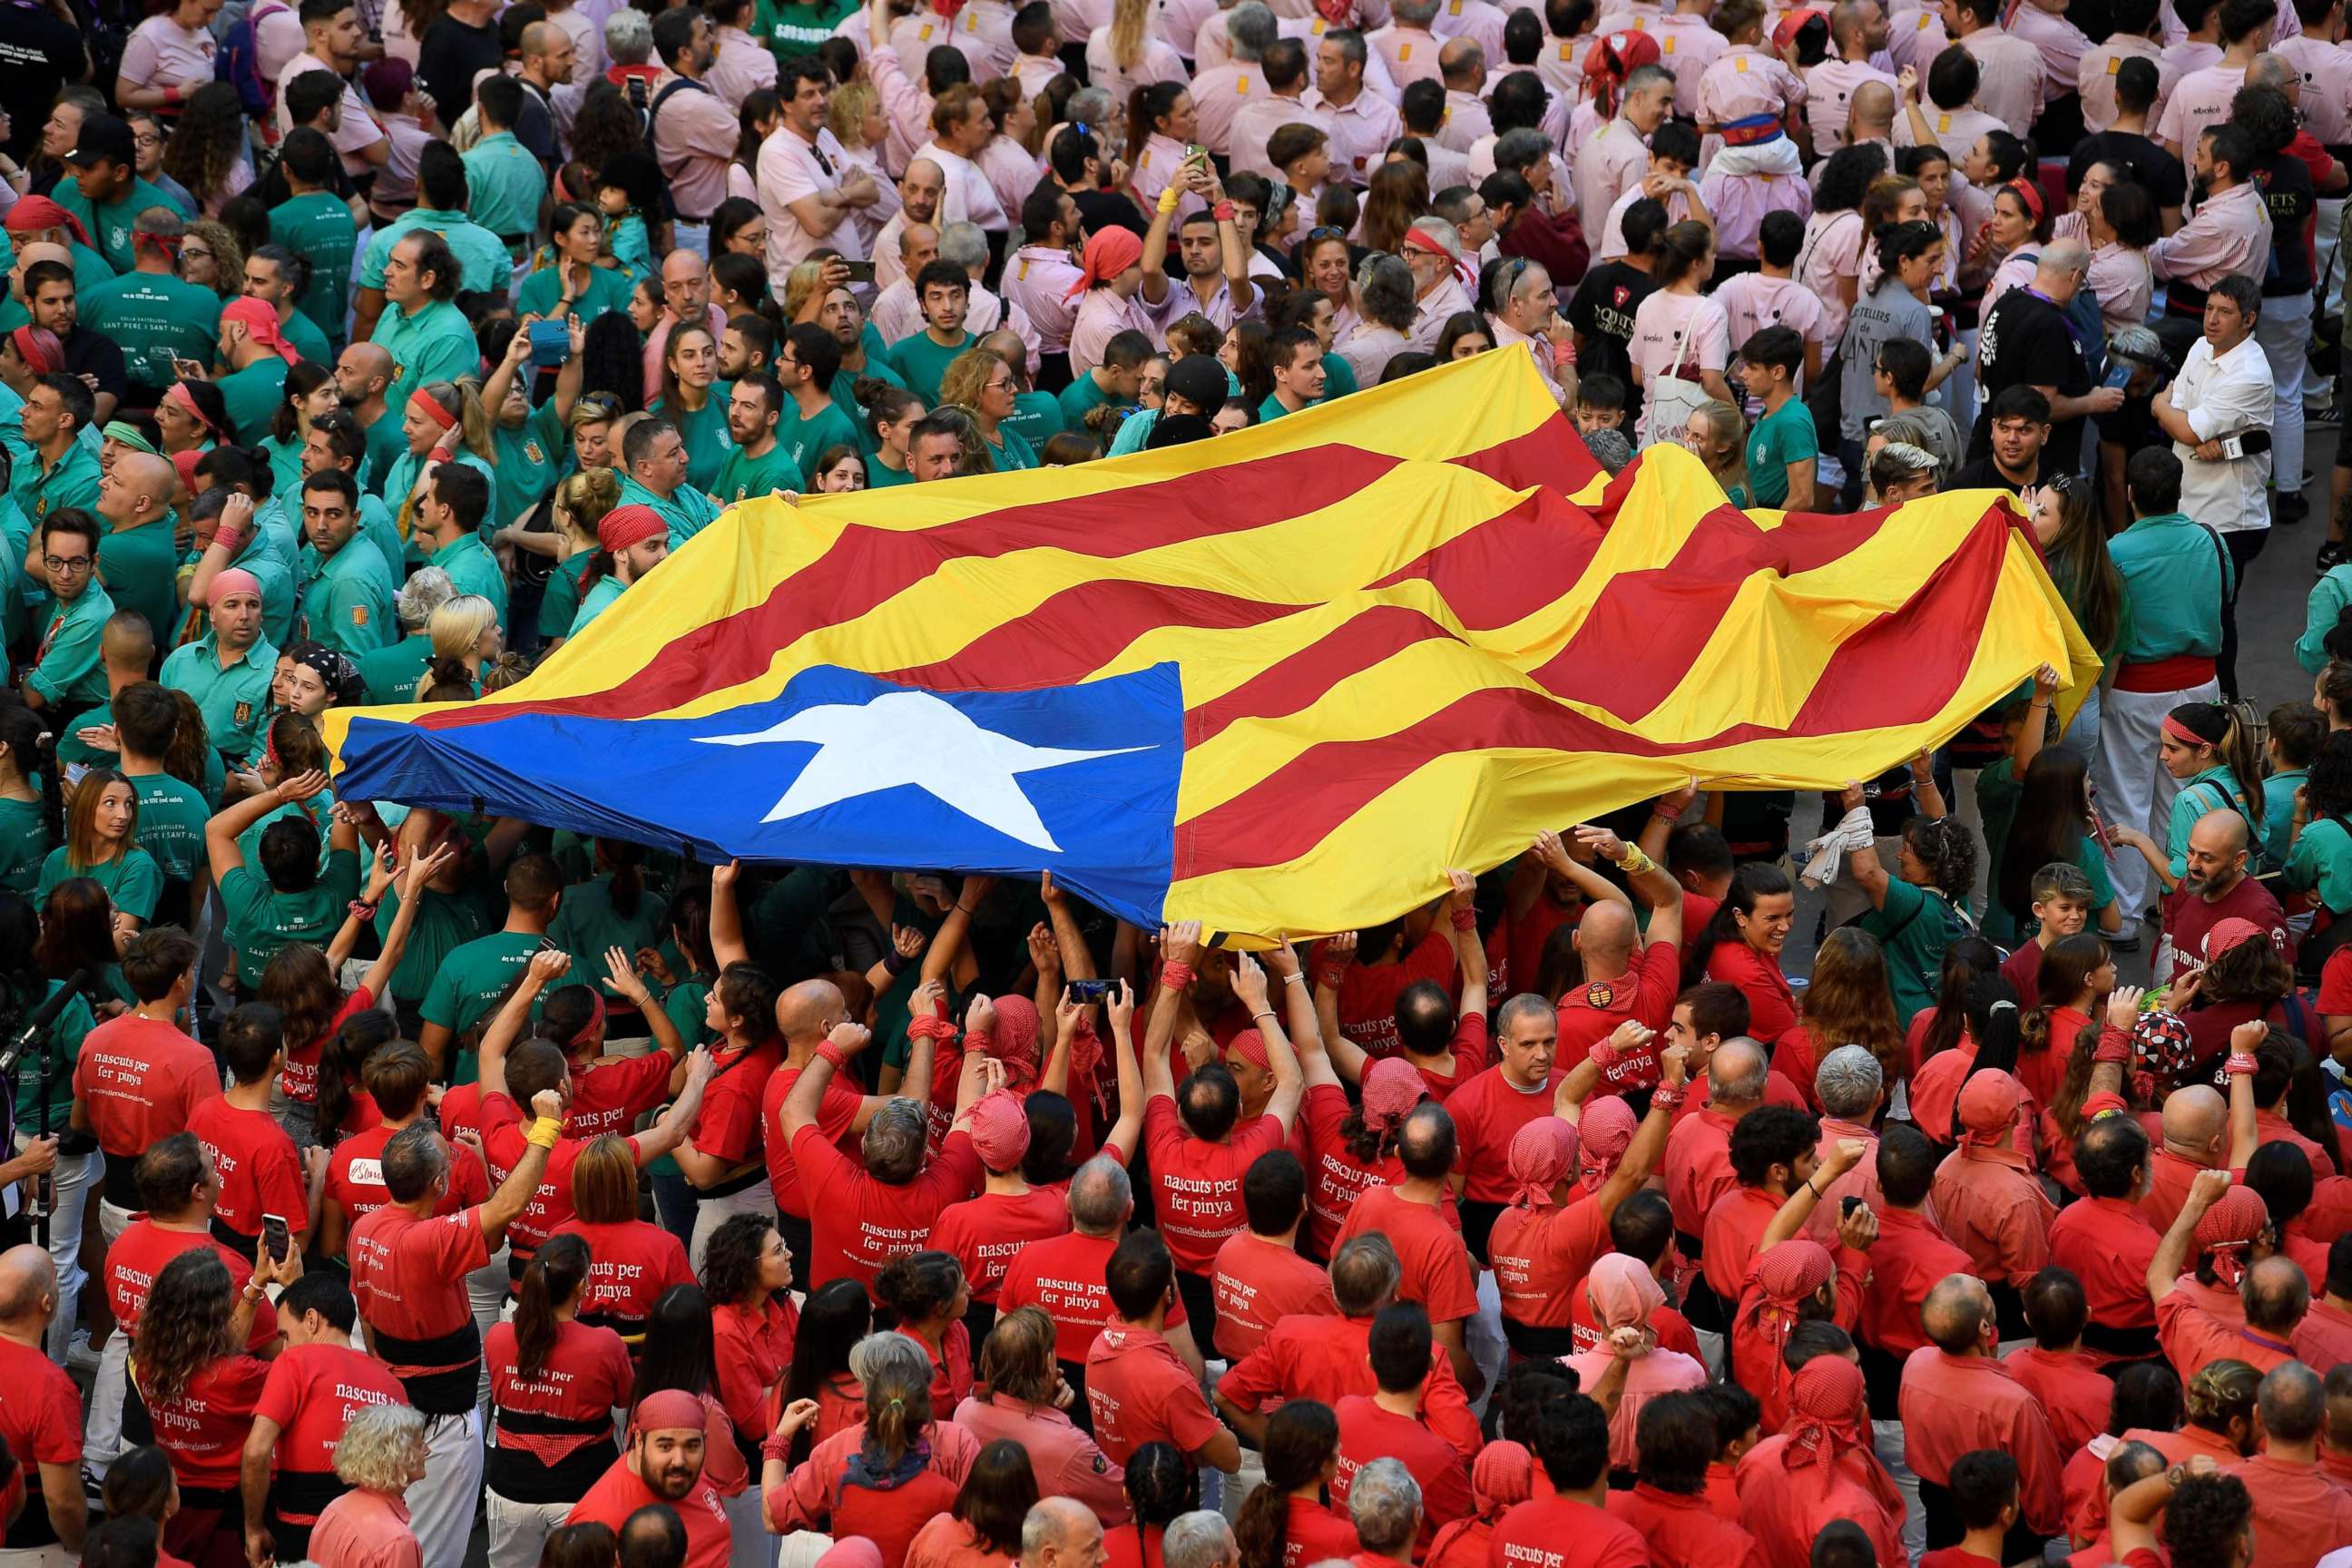 PHOTO: Teams members hold a Catalan pro-independence Estelada flag during the 28th edition of the 'human towers' competetion at the Tarraco arena in Tarragona on Oct. 2, 2022.